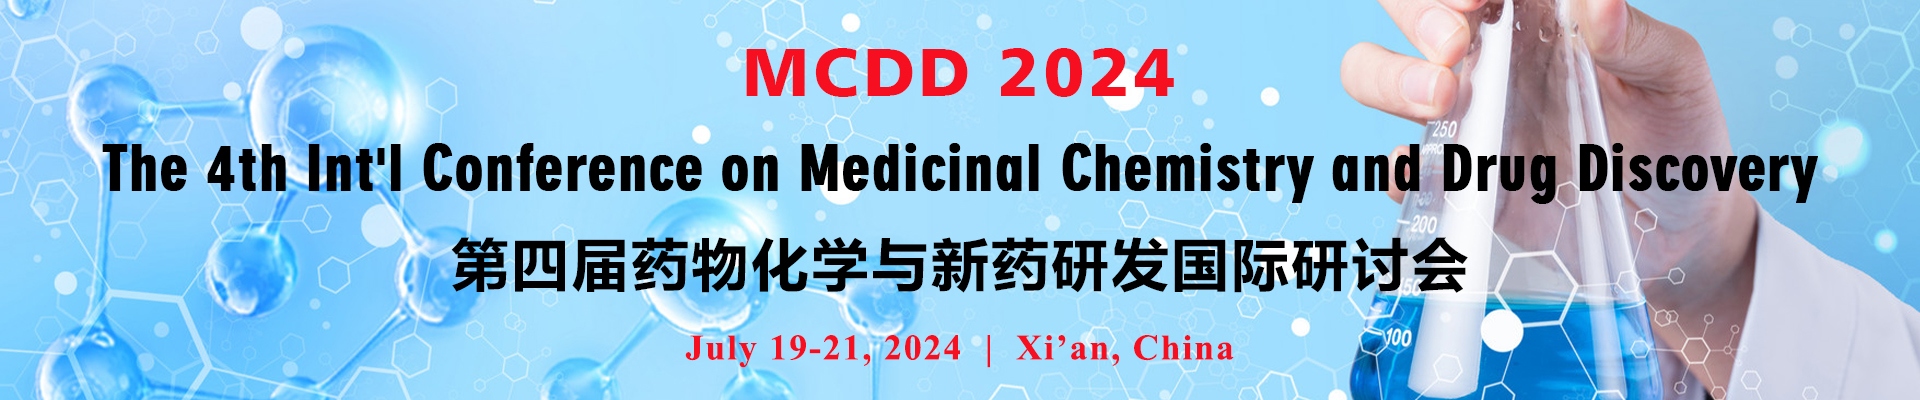 The 4th Int'l Conference on Medicinal Chemistry and Drug Discovery (MCDD 2024), Xi'an, Shaanxi, China